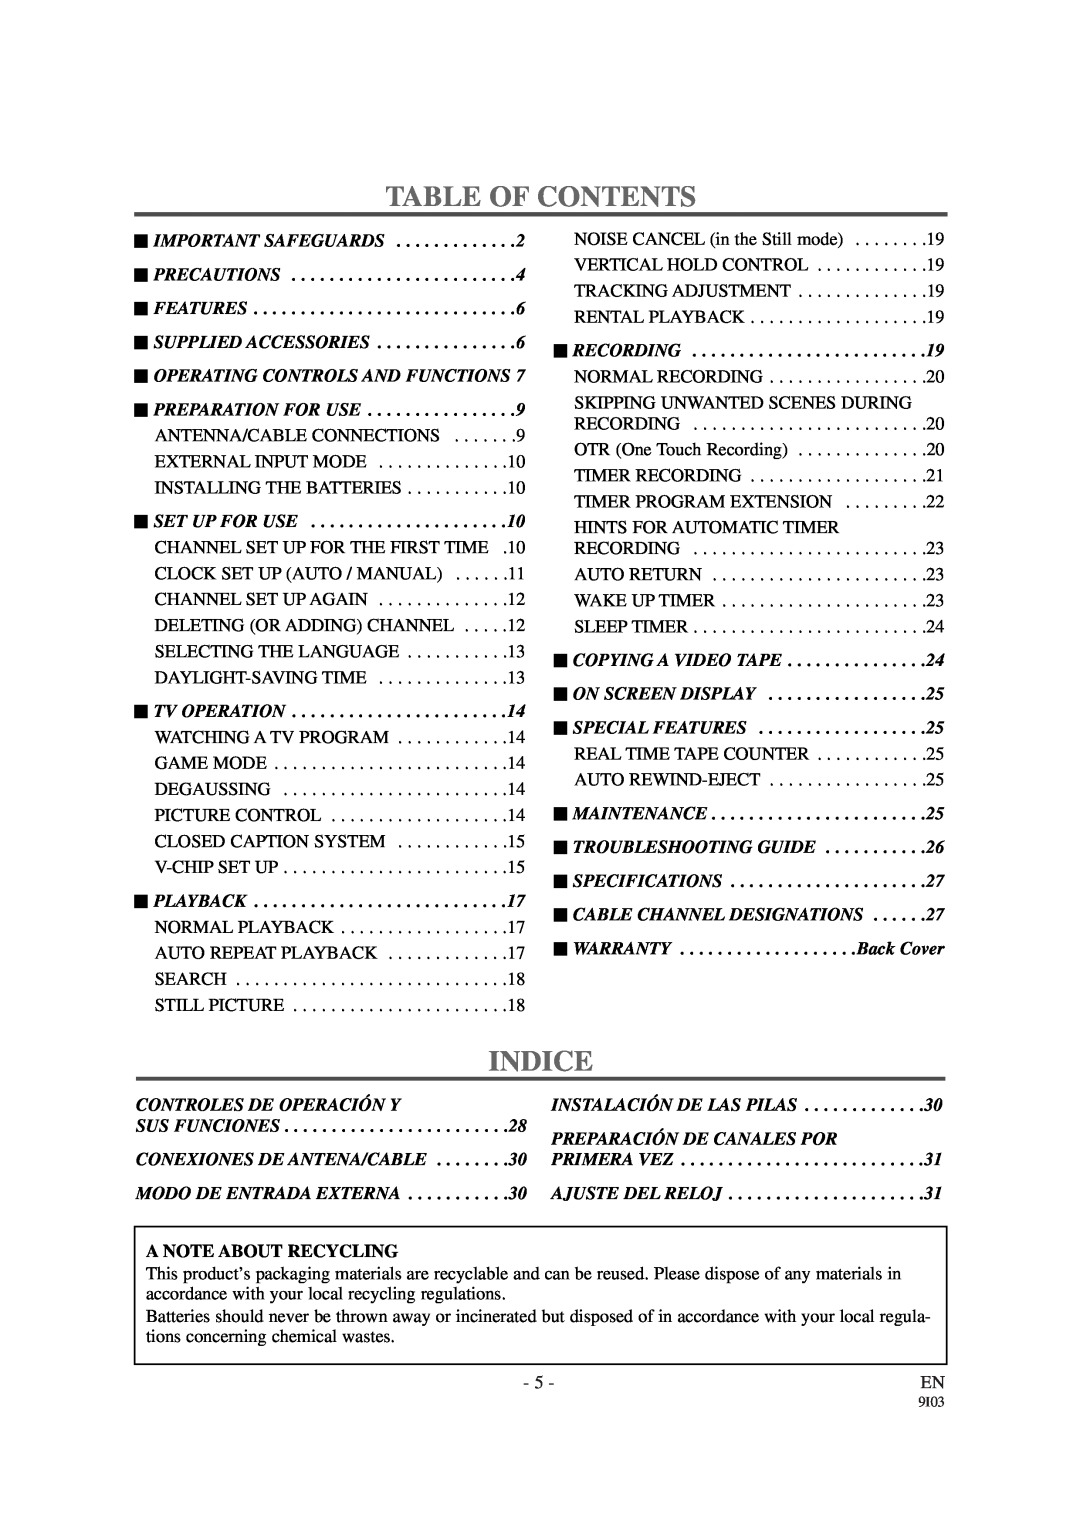 Symphonic WF-13C2 owner manual Table Of Contents, Indice, A Note About Recycling 